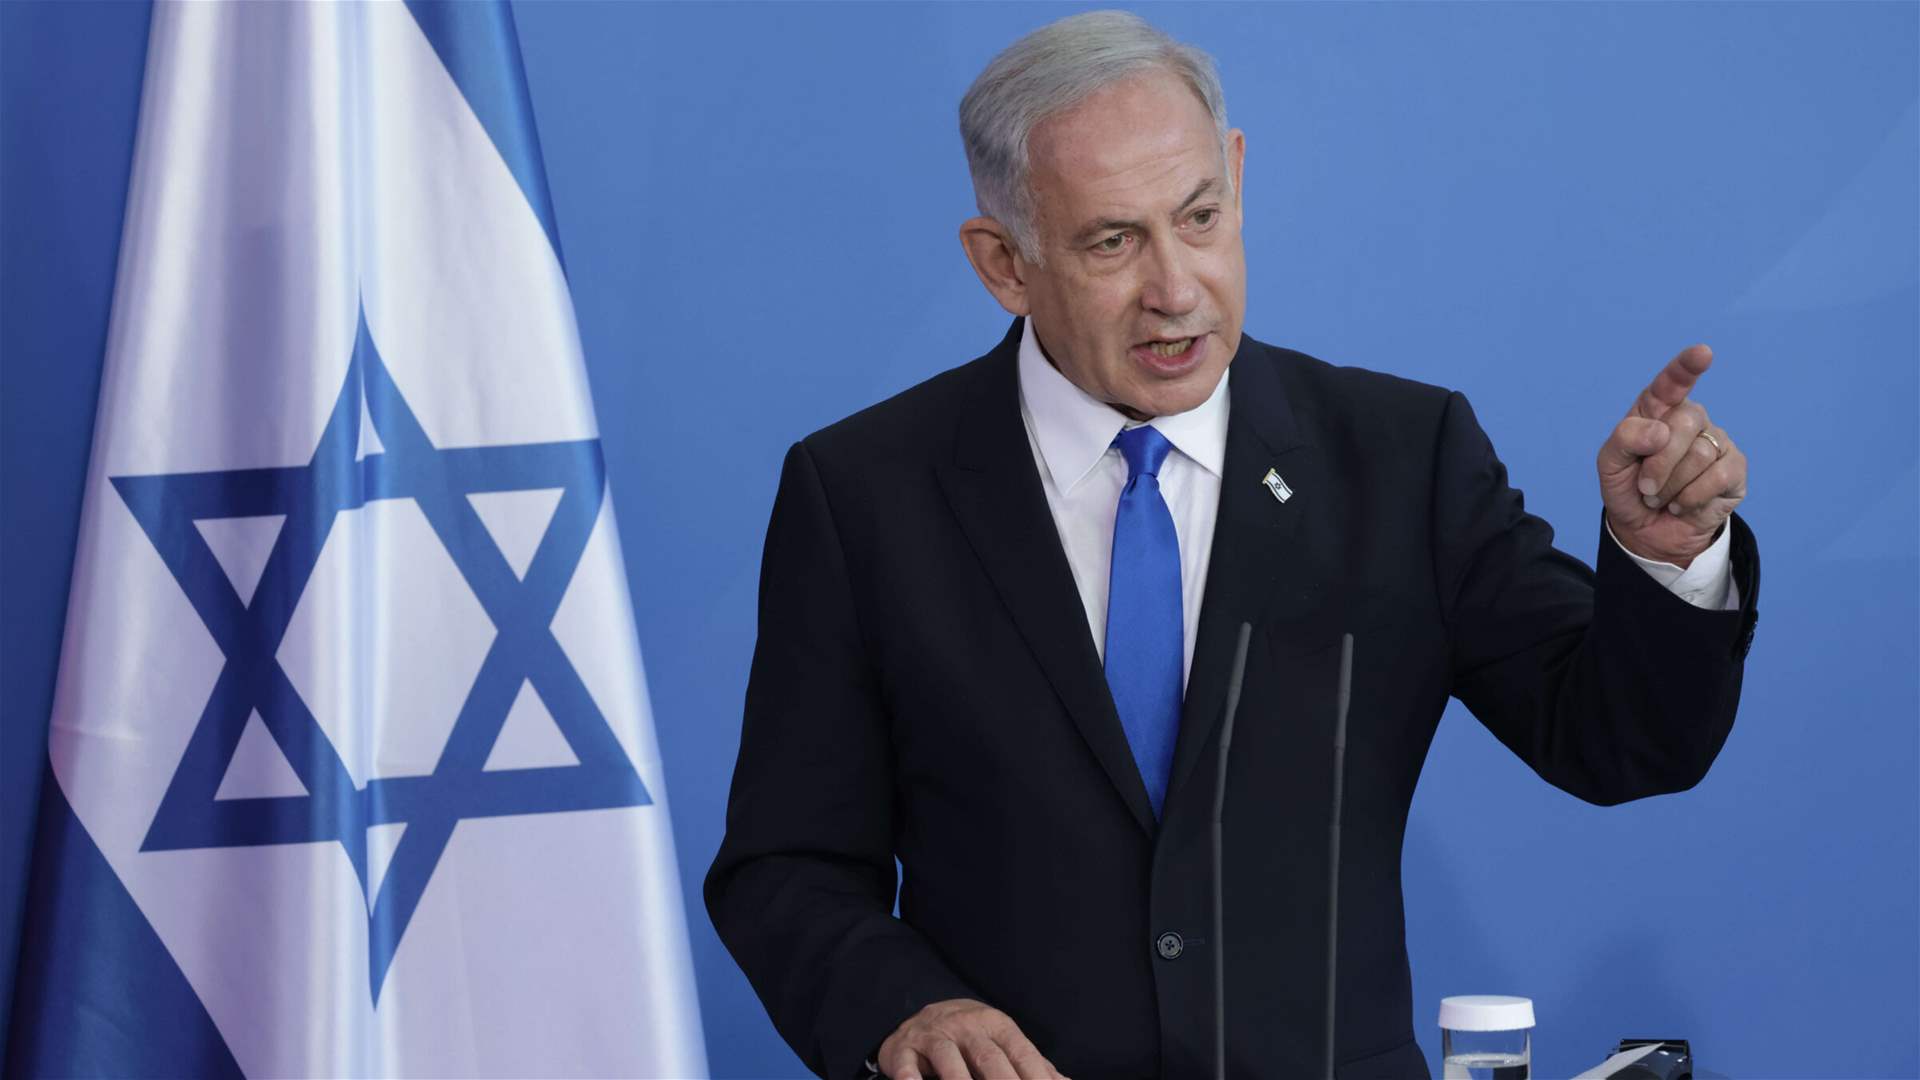 Netanyahu&#39;s Stance on Hostage Deal Sparks Tensions and Protests in Israel